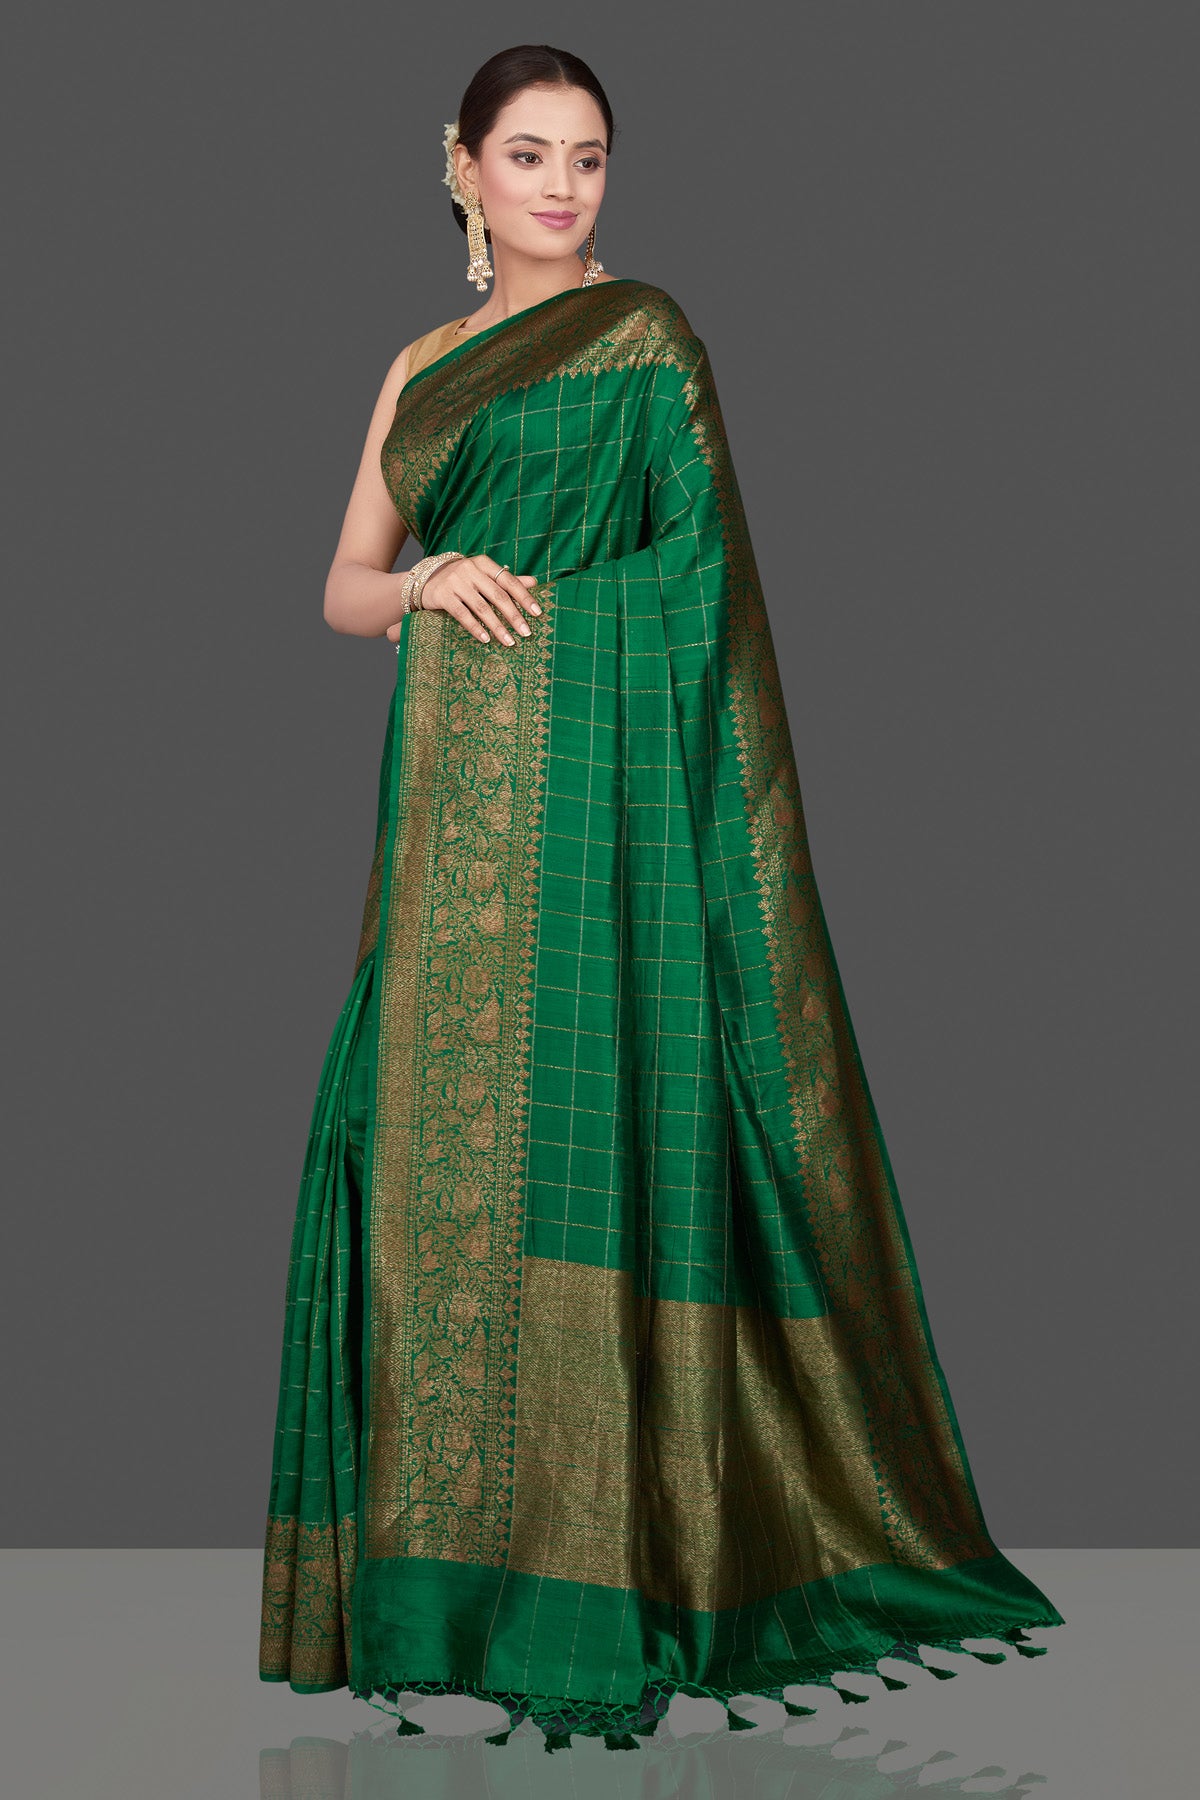 Shop stunning green check tussar Banarasi saree online in USA with antique zari border. Go for stunning Indian designer sarees, georgette sarees, handwoven saris, embroidered sarees for festive occasions and weddings from Pure Elegance Indian clothing store in USA.-pallu